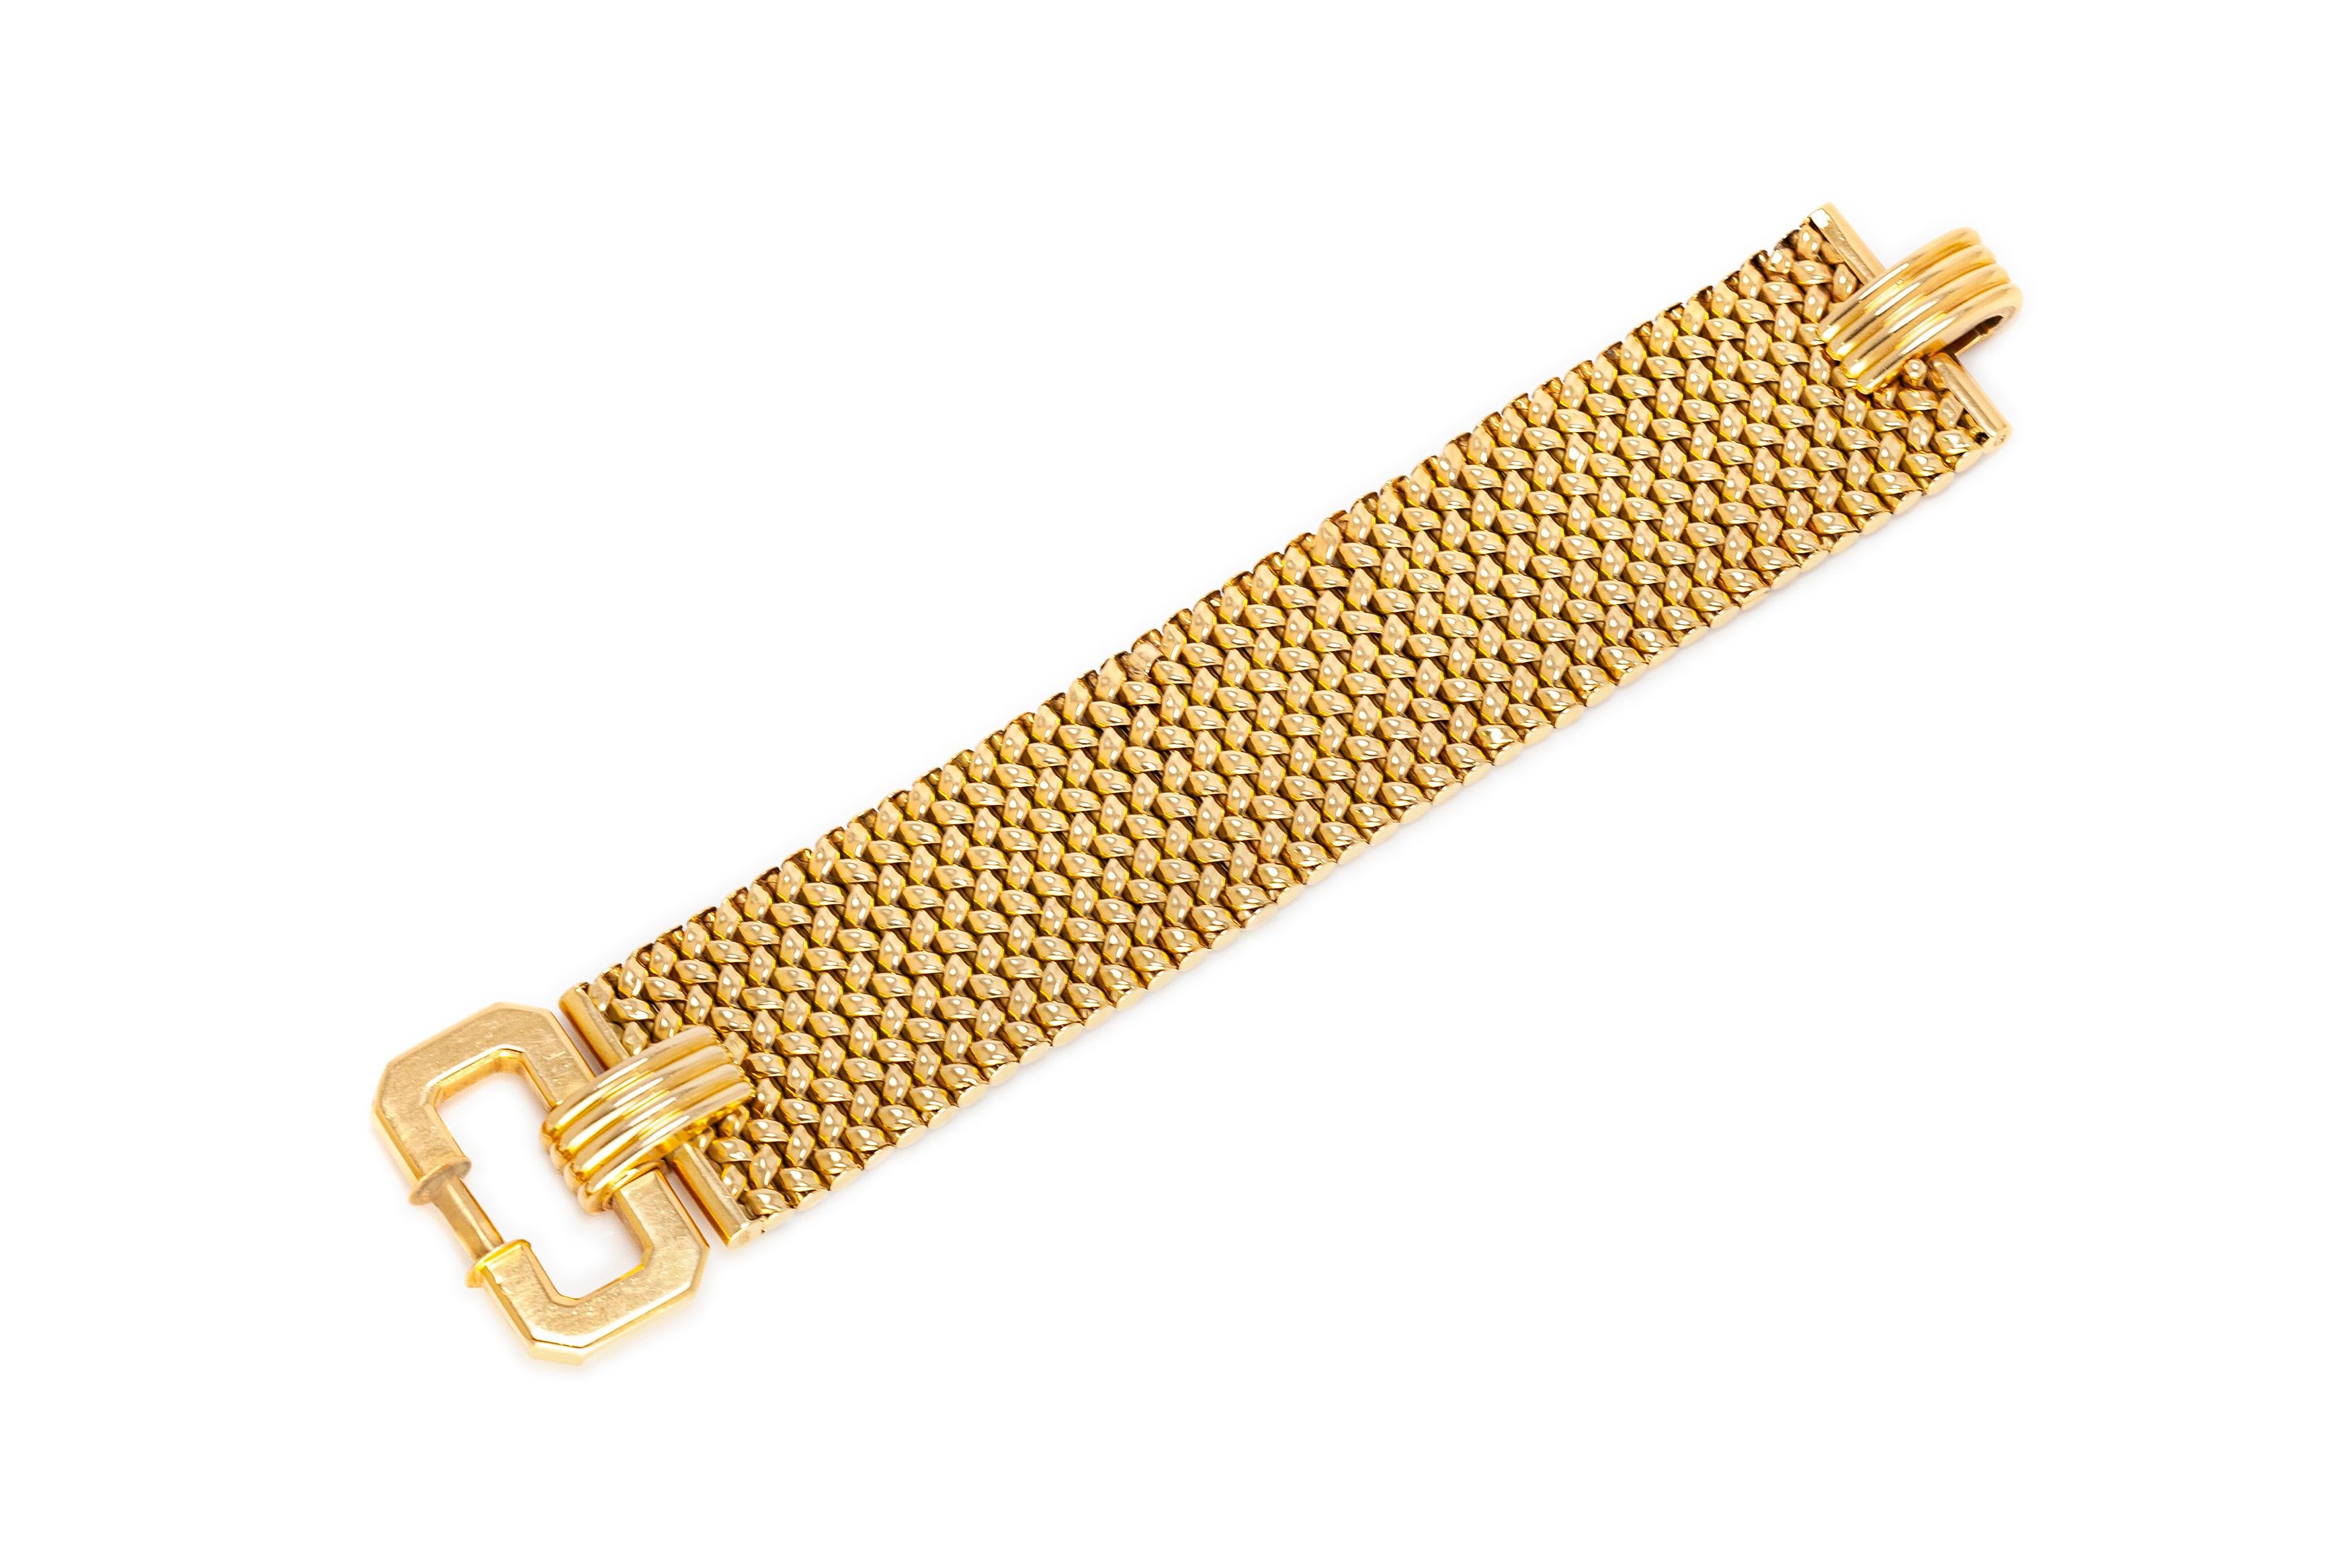 Buckle bracelet finely crafted in 18k yellow gold weighing 54.00 dwt. Circa 1960's. 